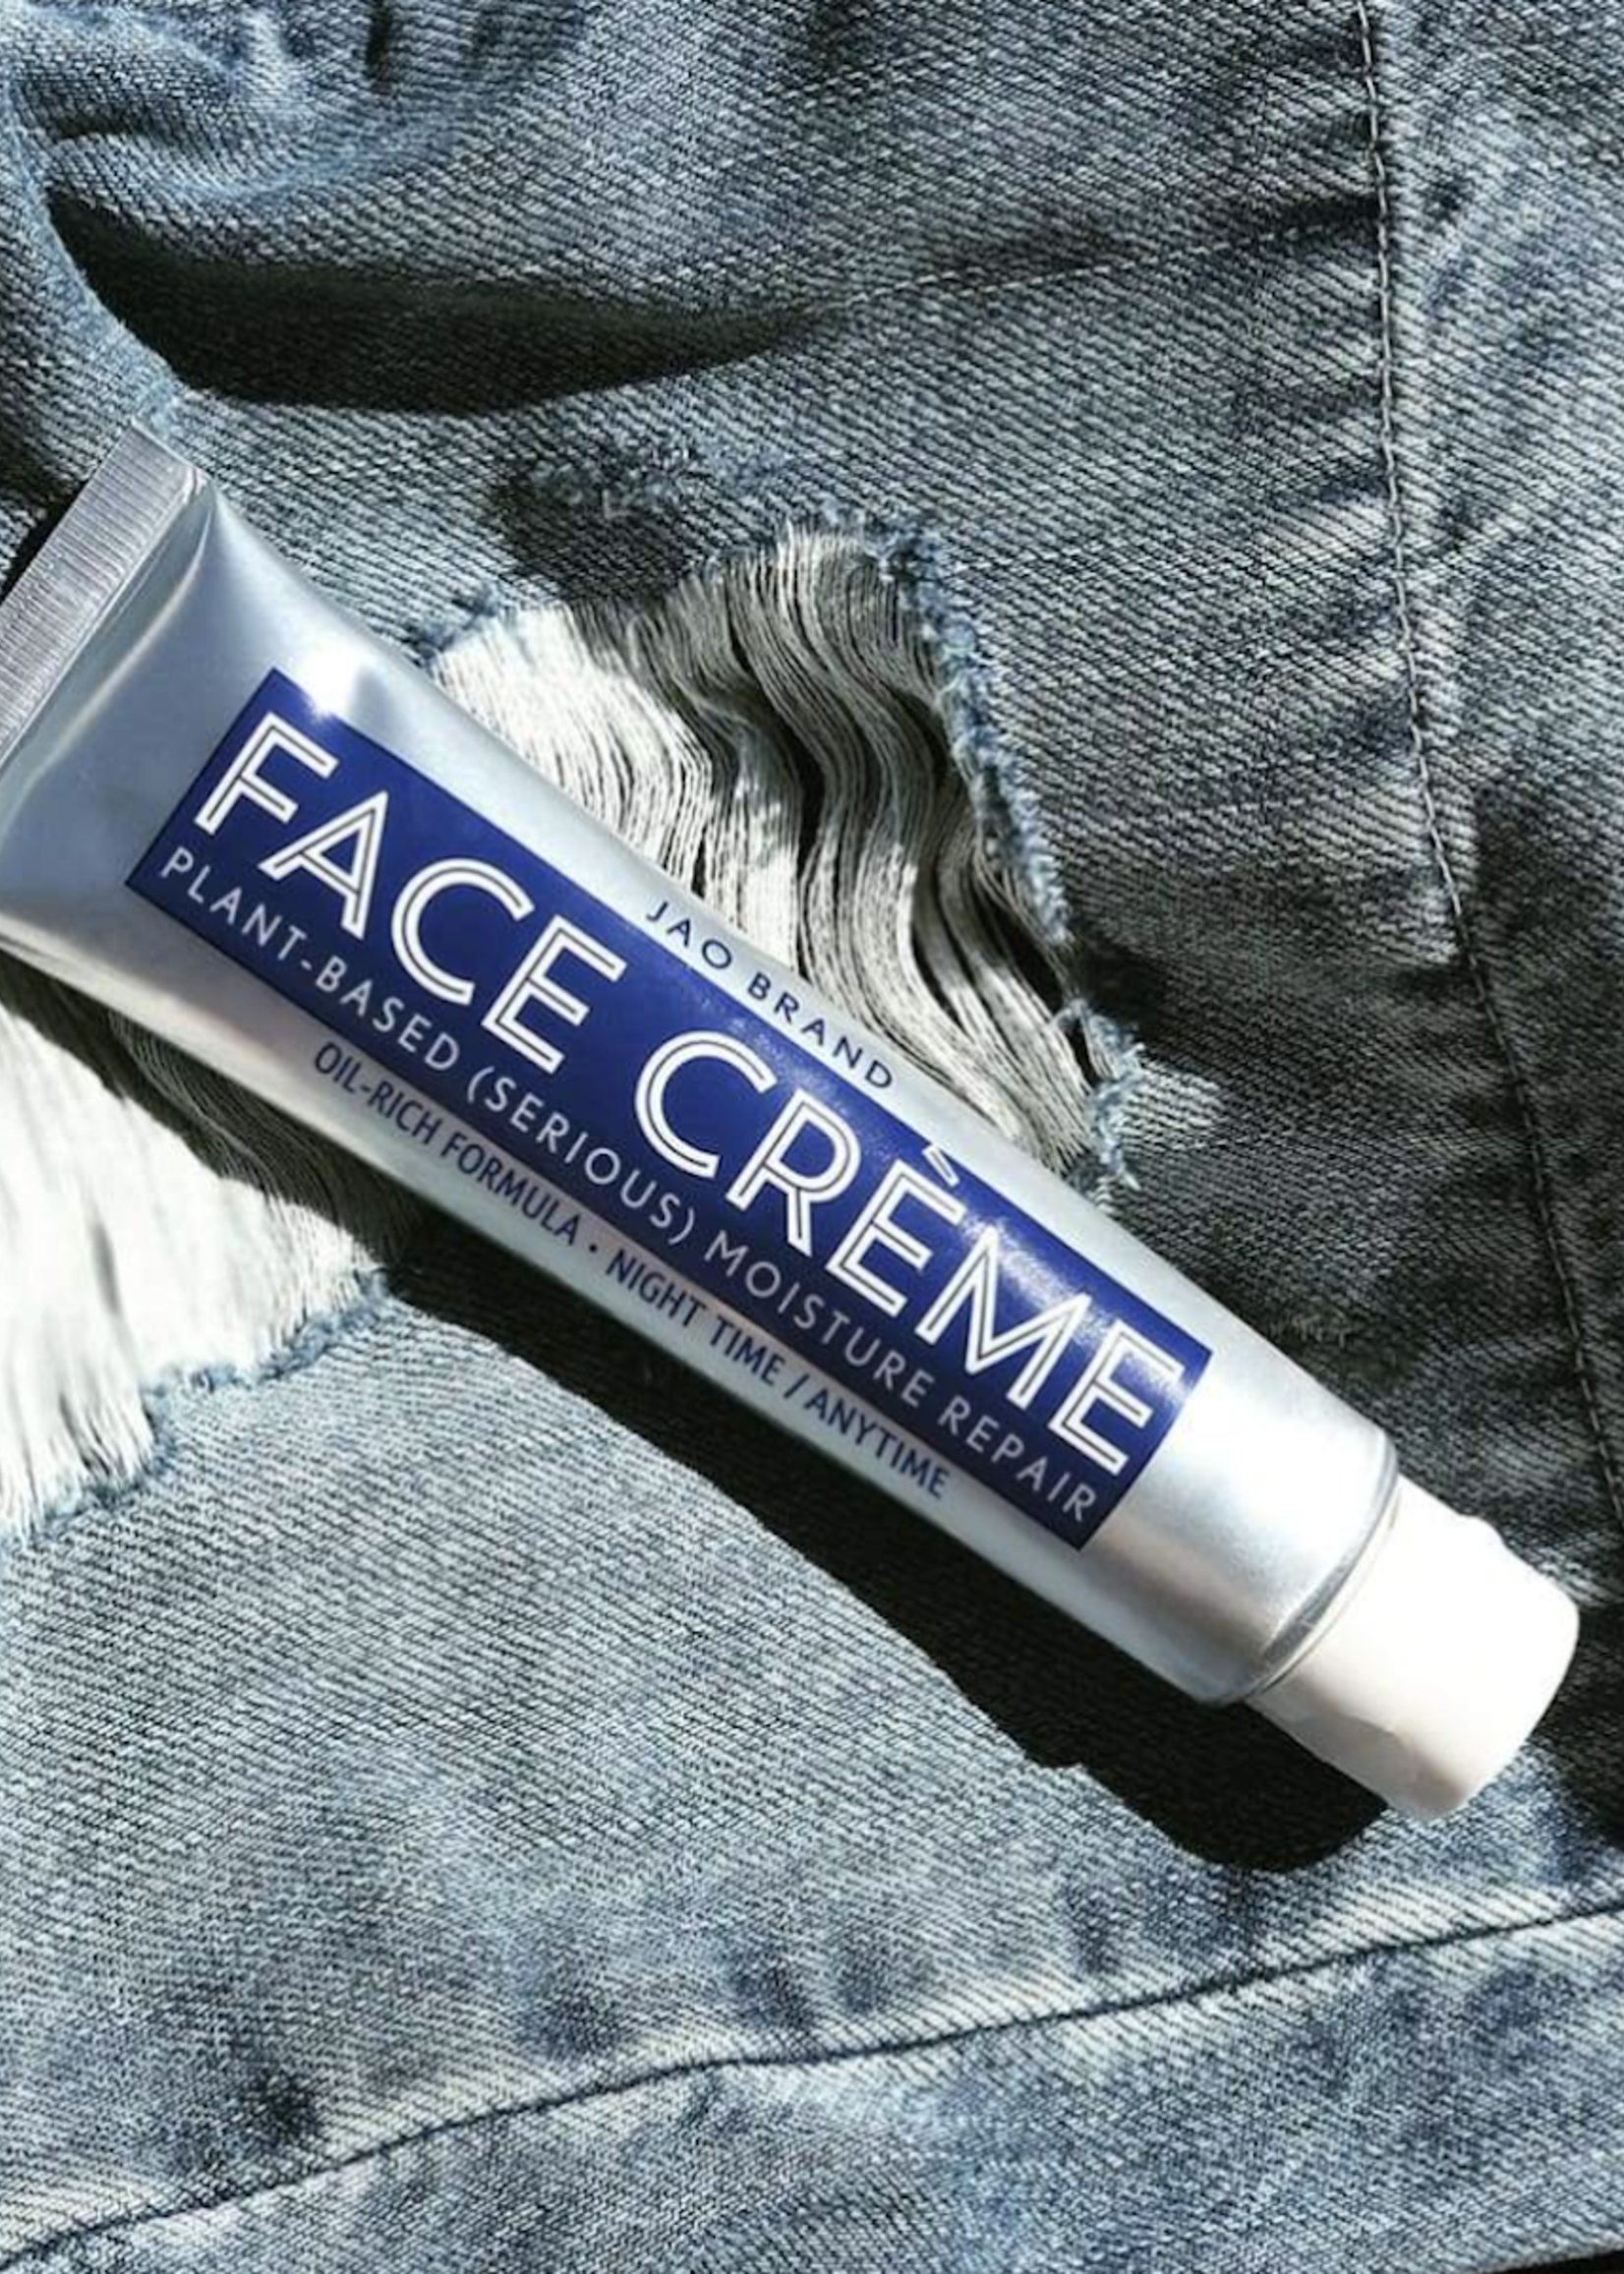 Jao Brand Face Crème Night Time/Anytime